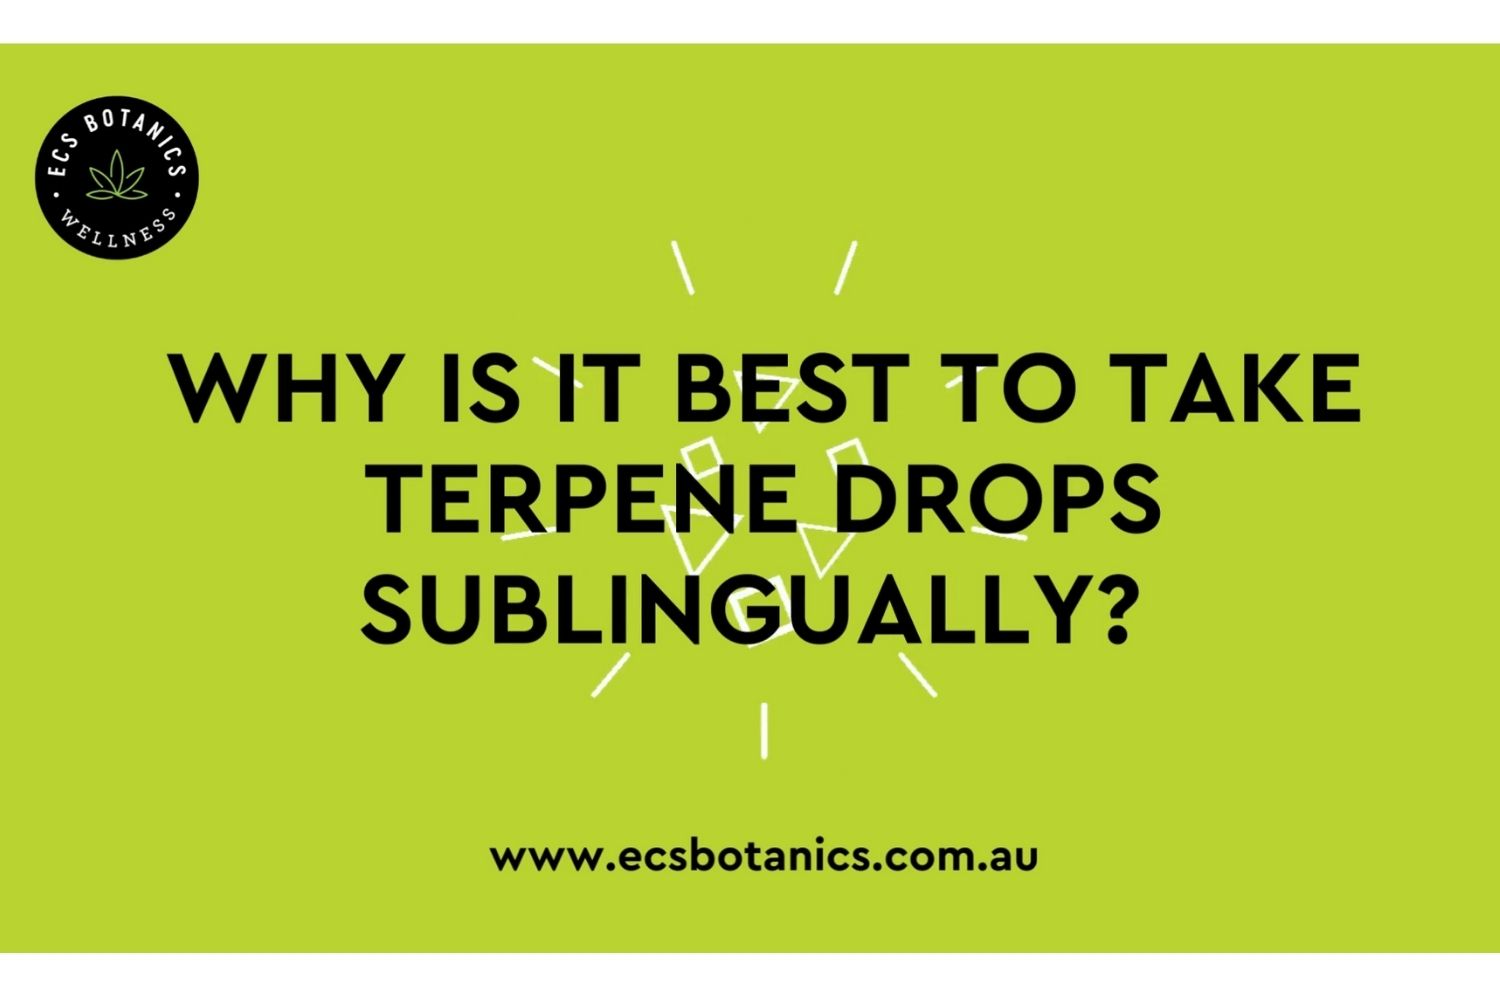 ECS Botanics - Why is it best to take terpene drops sublingually